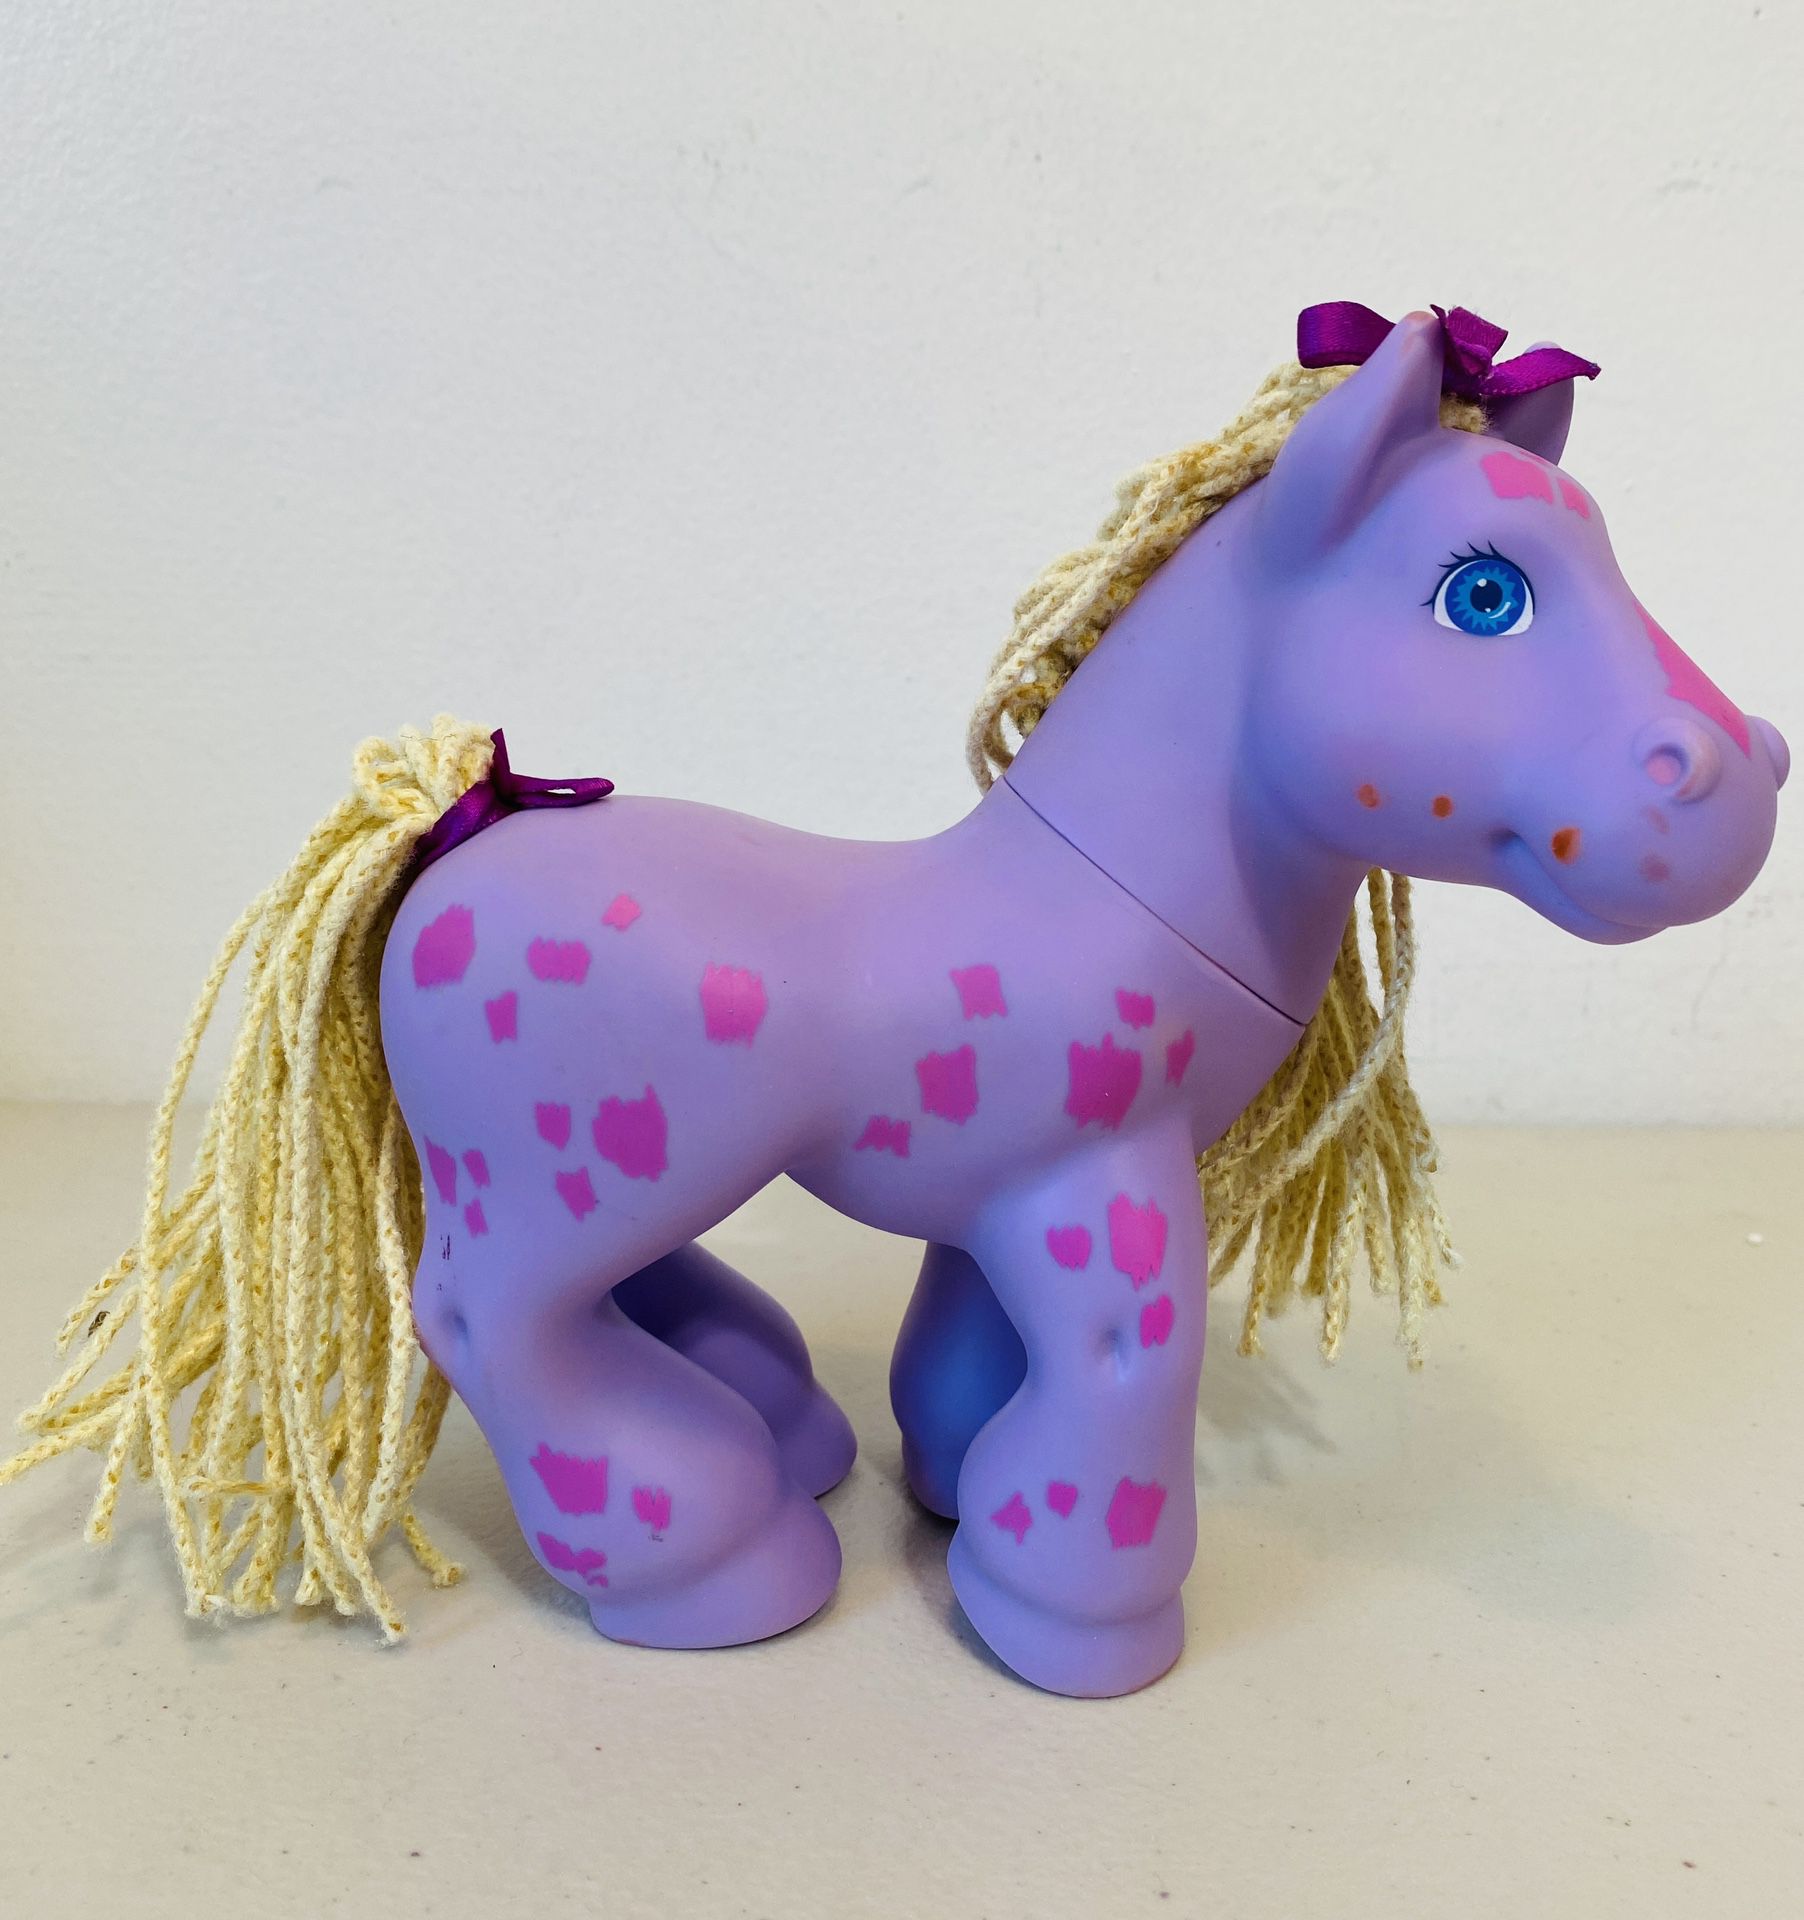 VNTG Hasbro 1992 Cabbage Patch Crimp ‘n Curl Springsong Pony Purple Pink 6" GUC